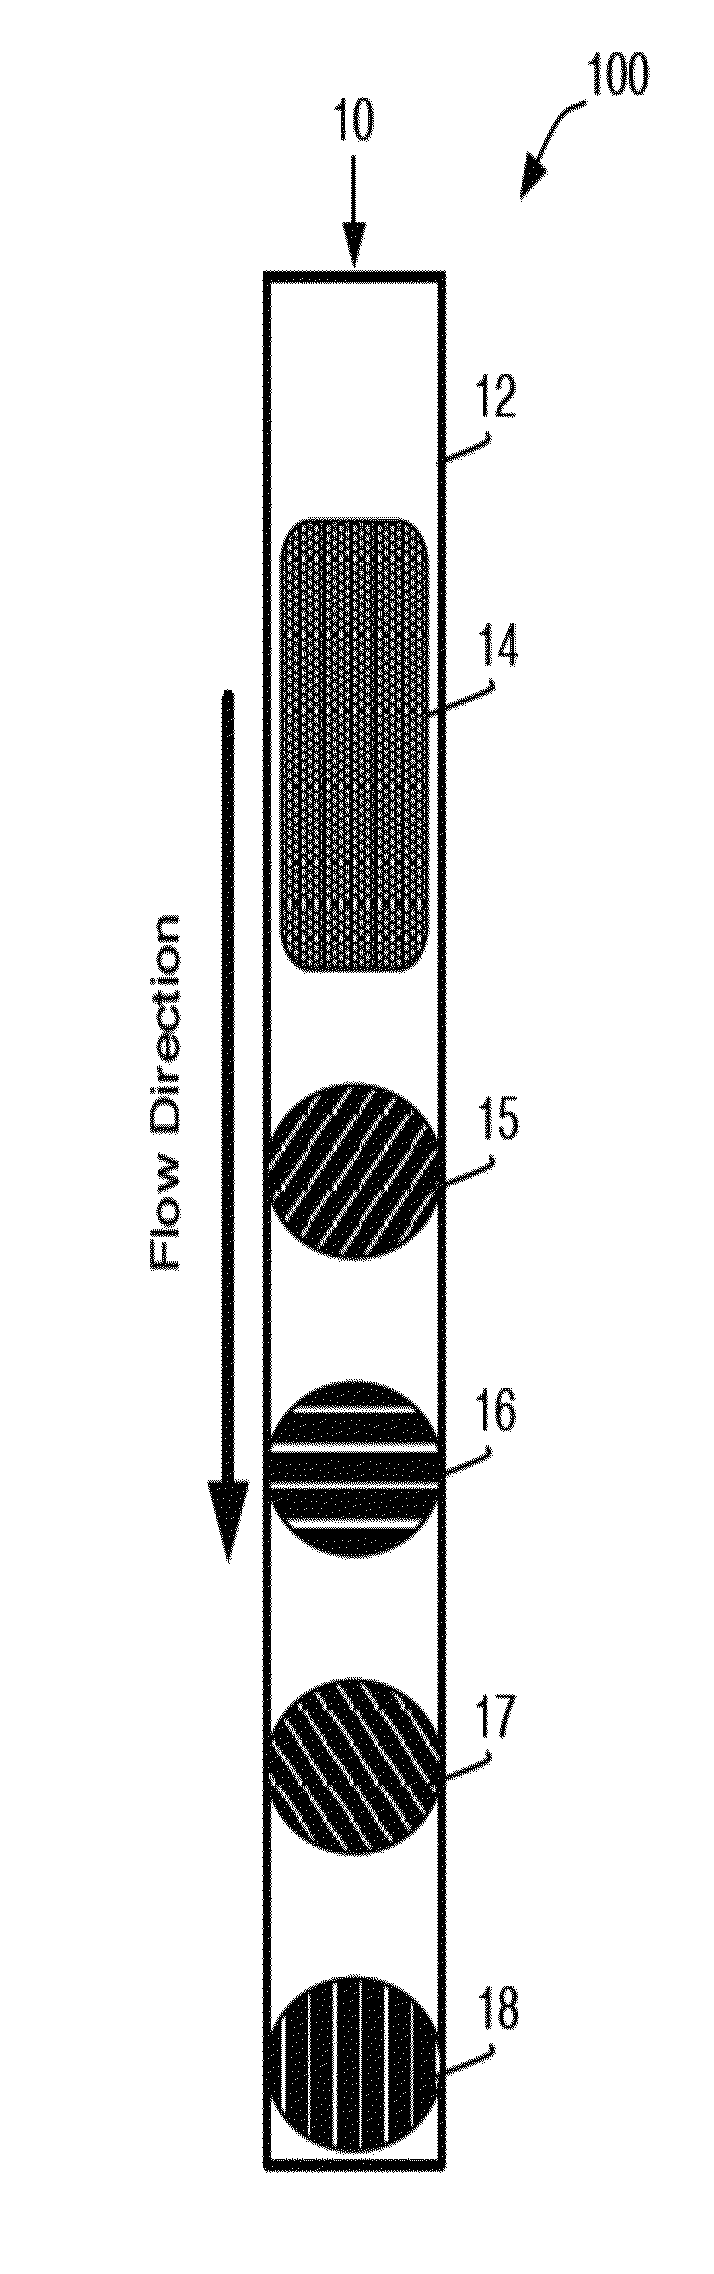 Methods and Systems for Detecting an Analyte in a Sample